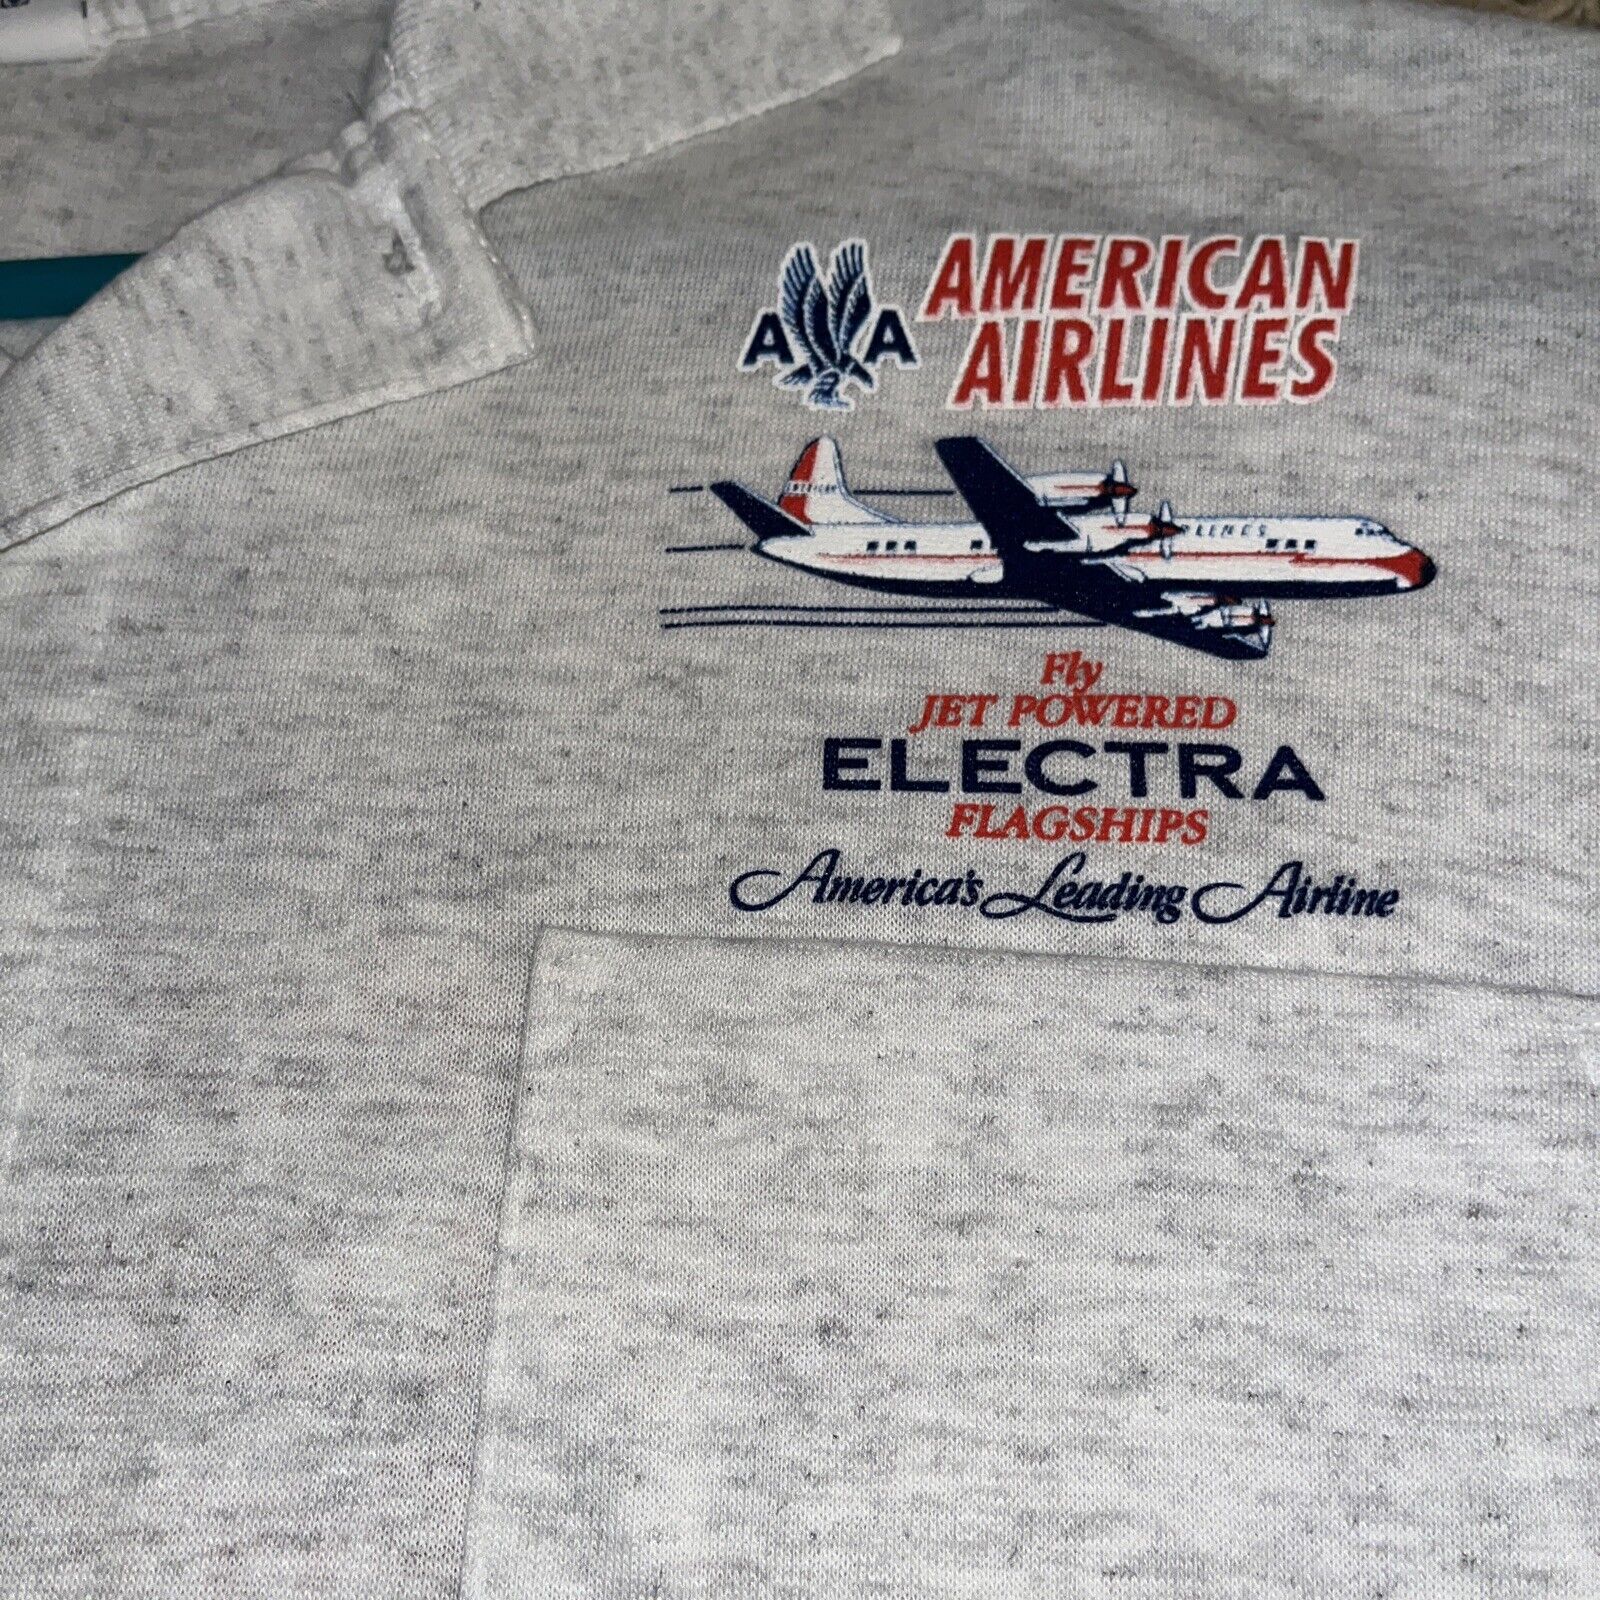 Vintage American Airlines Fly Jet Powered ELECTRA Flagships Polo